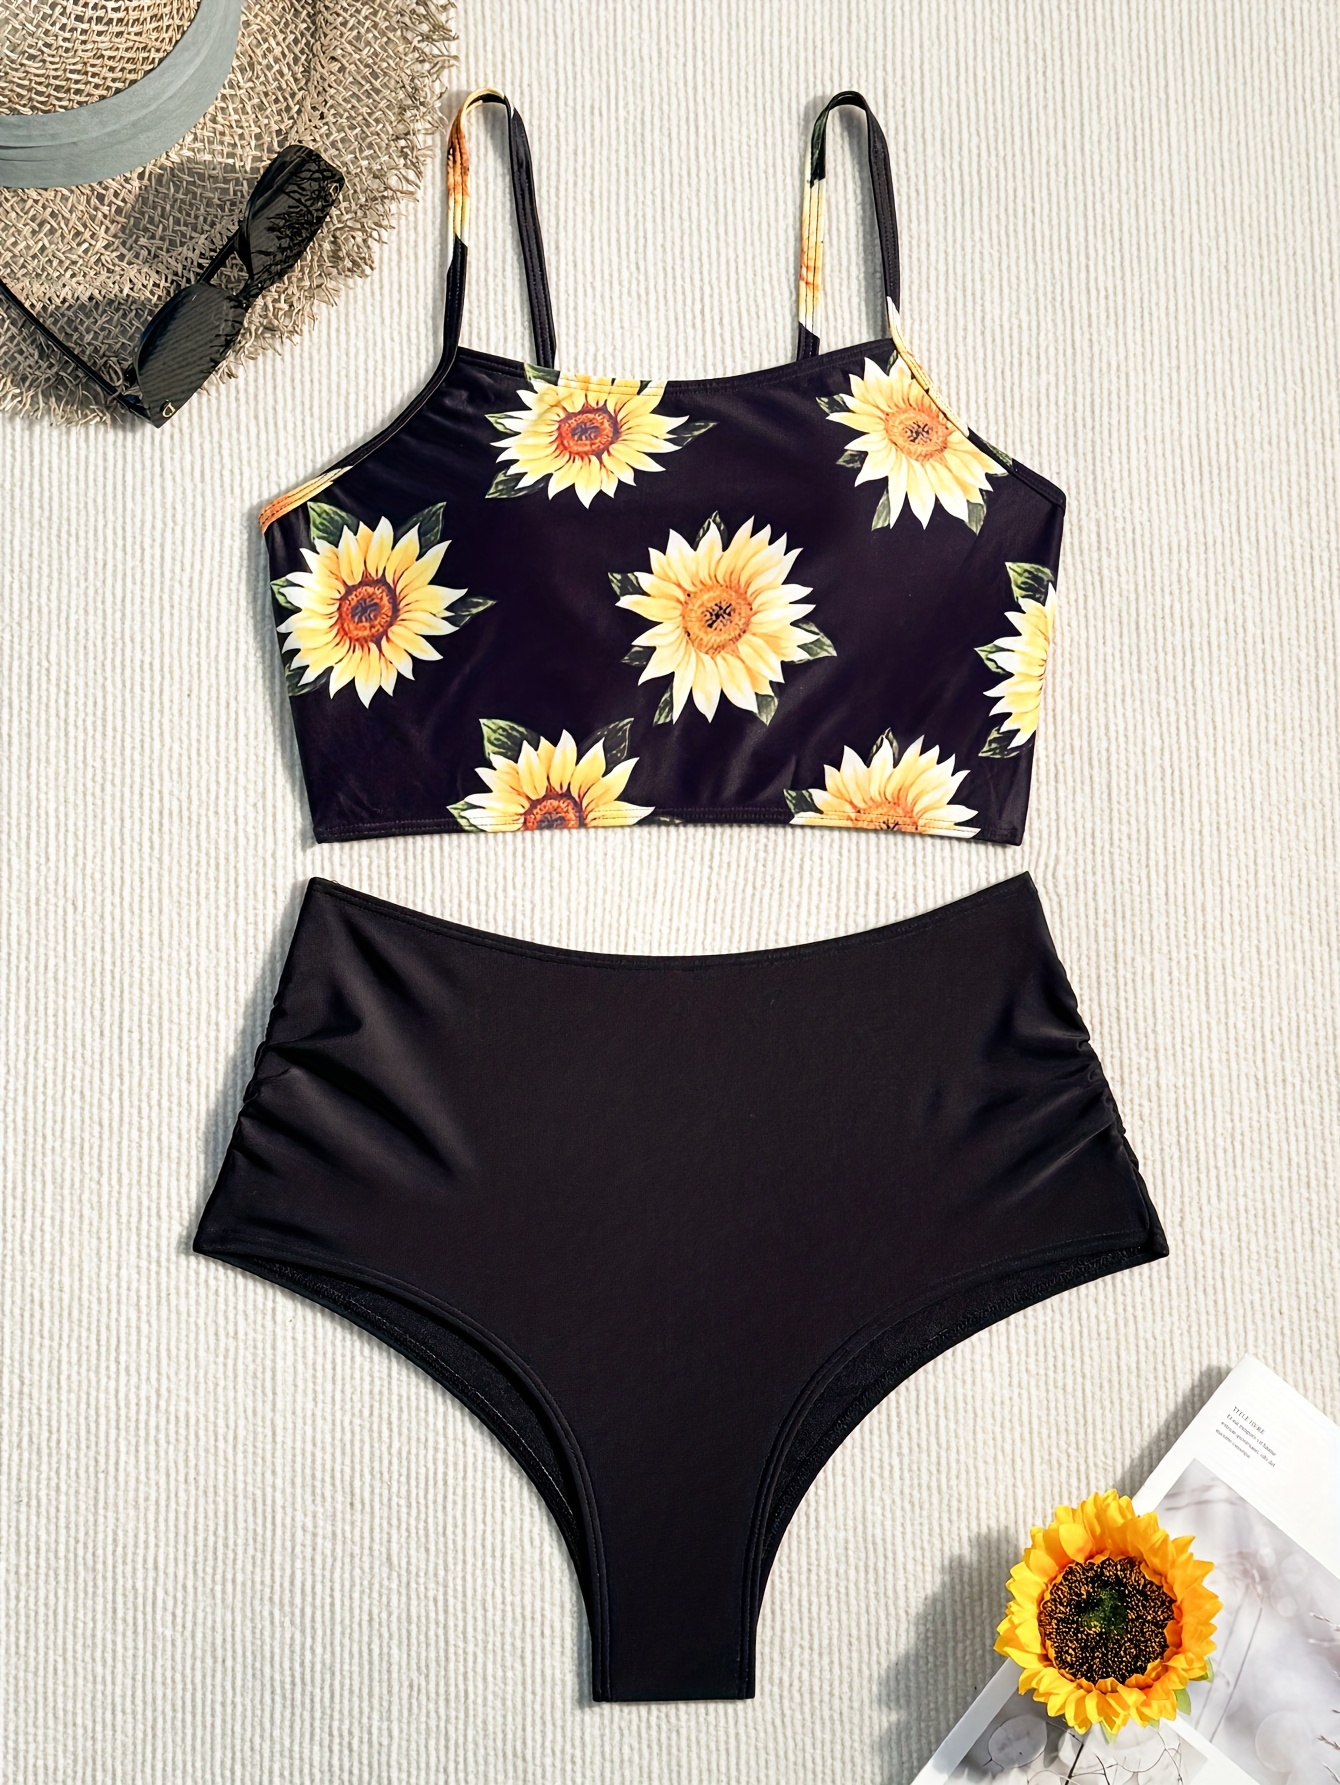 Sunflower Two Piece Floral One Piece Swimsuit Set For Women And Girls 12 14  Sexy Bikini With Tummy Control For Ladies Swimming From Vanilla10, $19.53